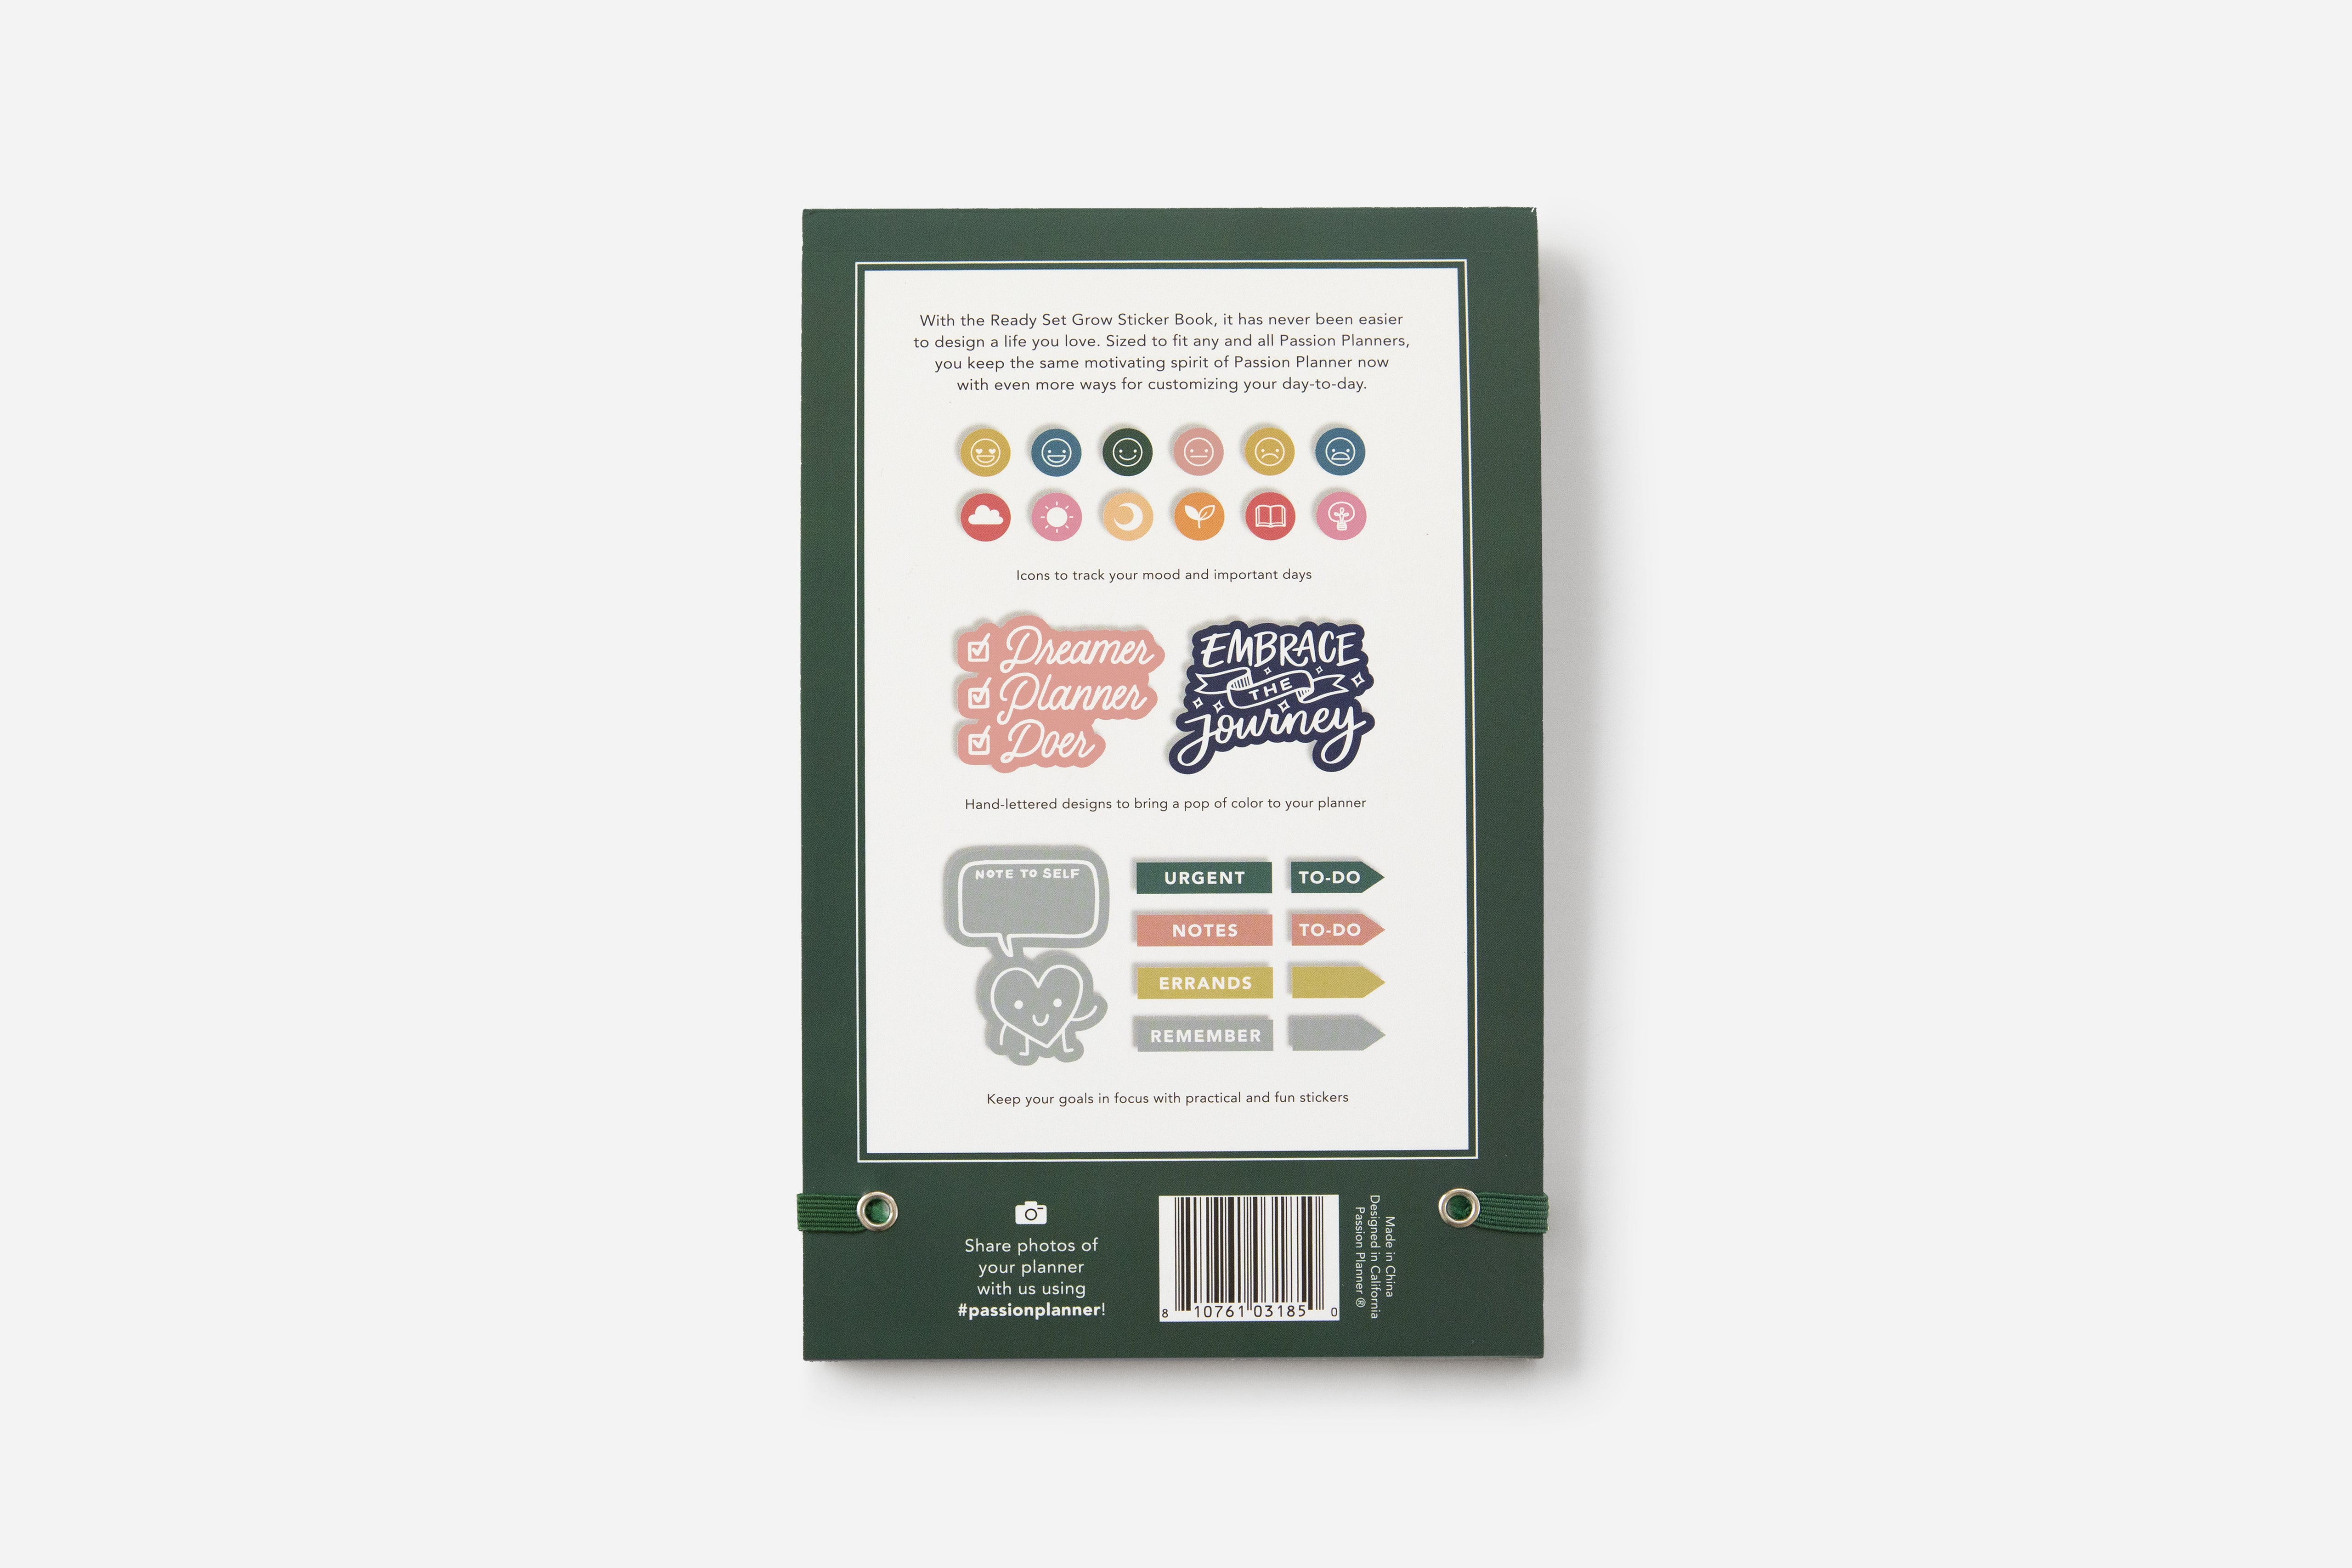 Ready Set Grow Sticker Book - Passion Planner